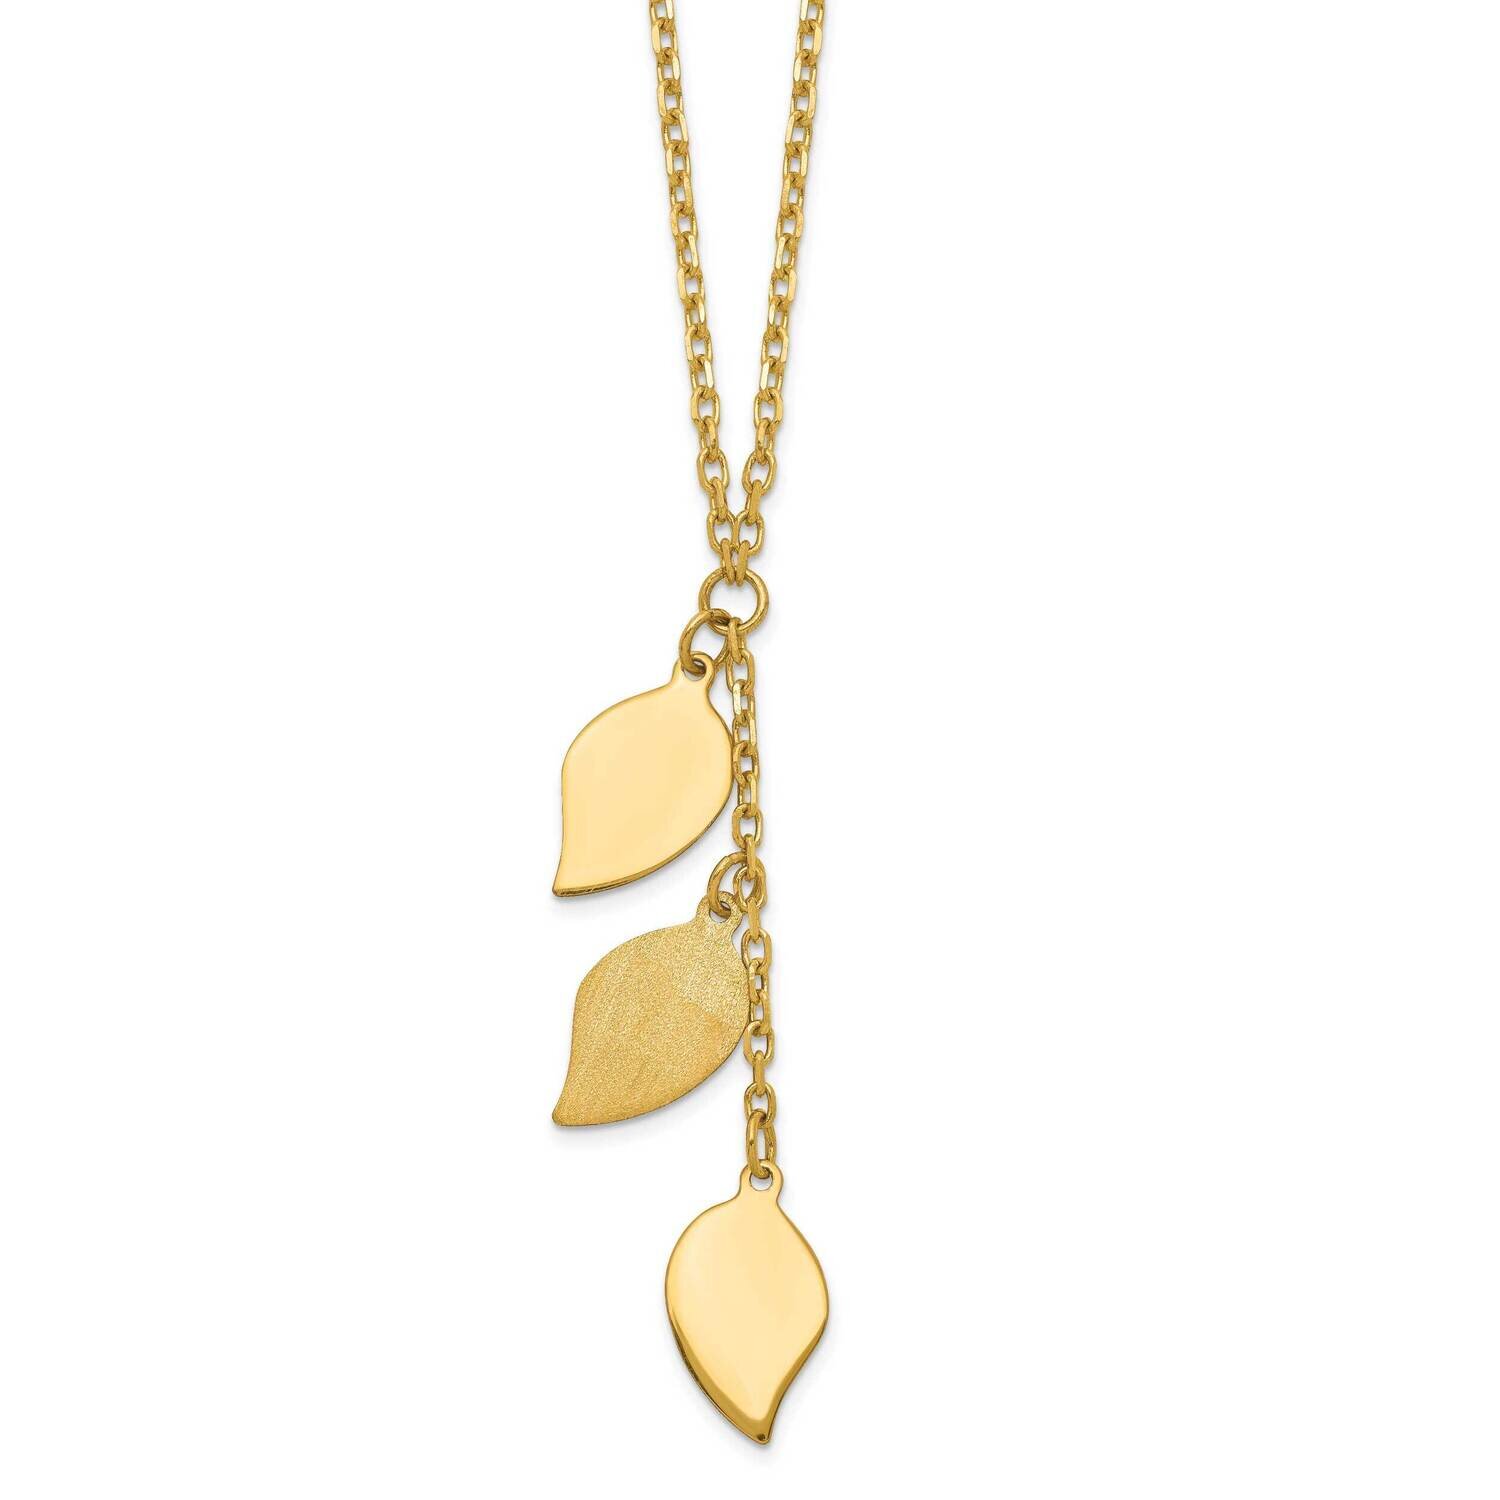 Brushed & Polished with 2 Inch Extension Leaf Necklace 14k Gold SF2677-16